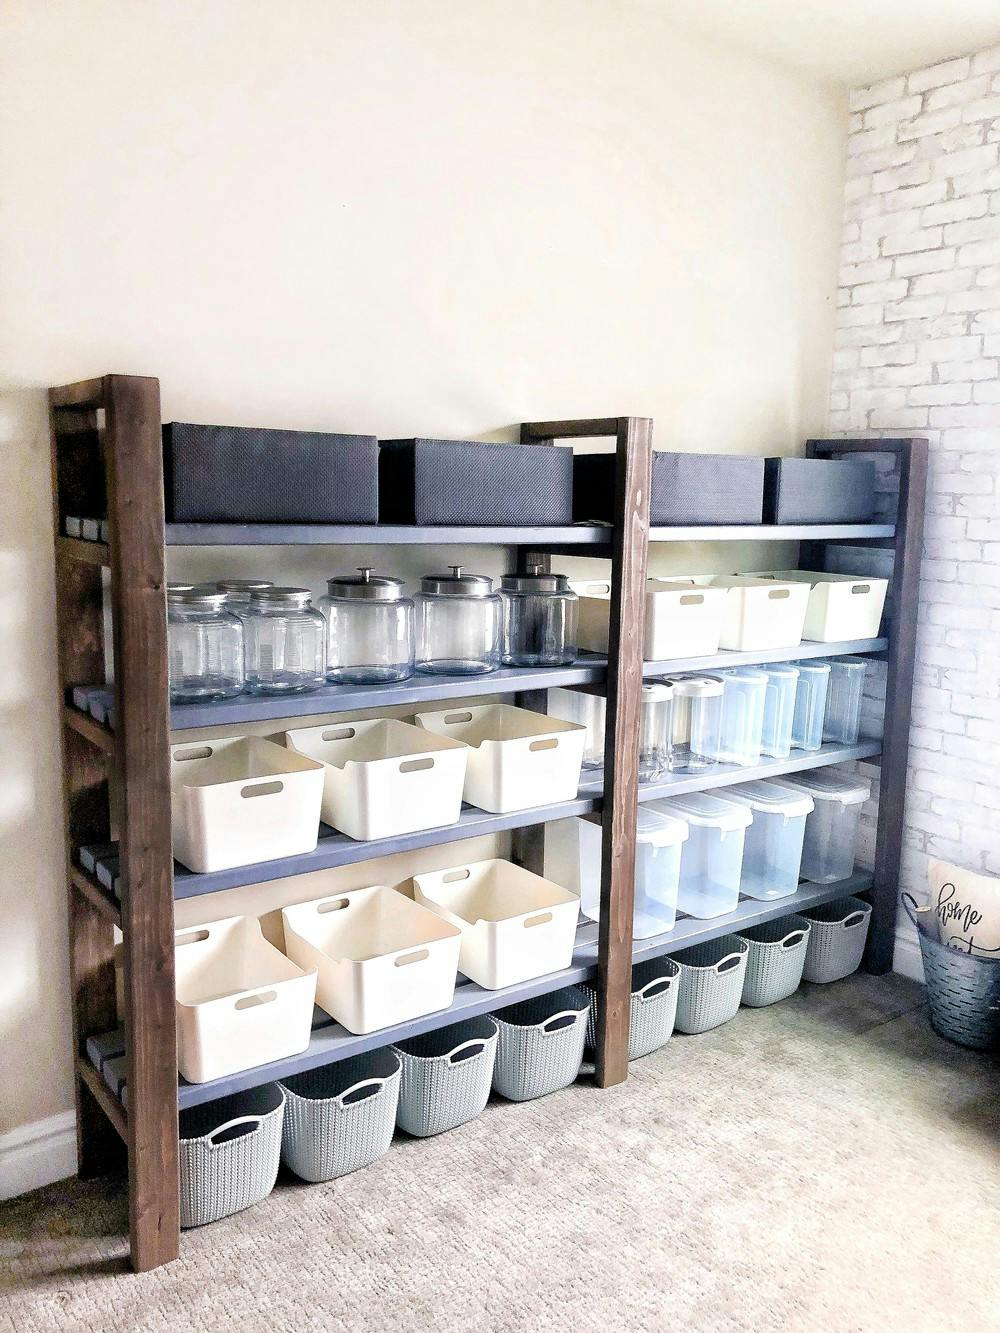 9 Organization Projects From Our Friends | Container Stories